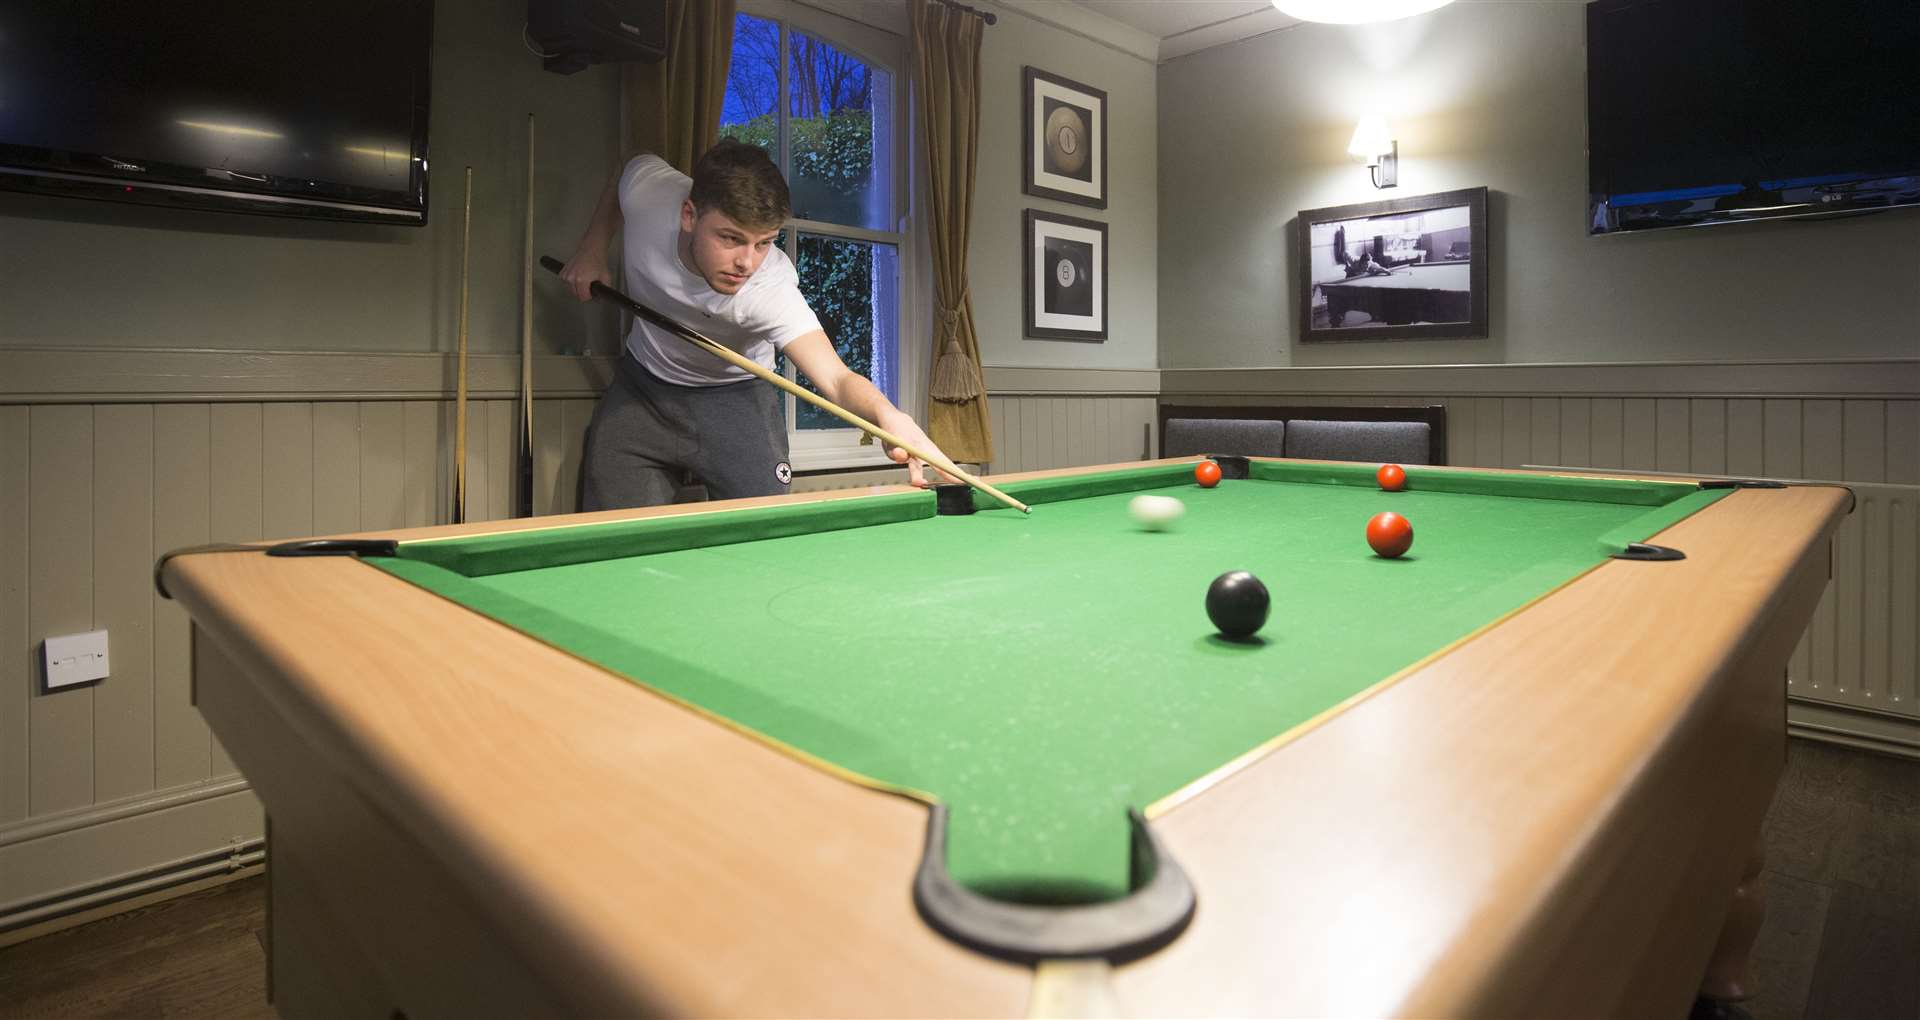 There's also a pool table plus plenty of TV screens showing live sport